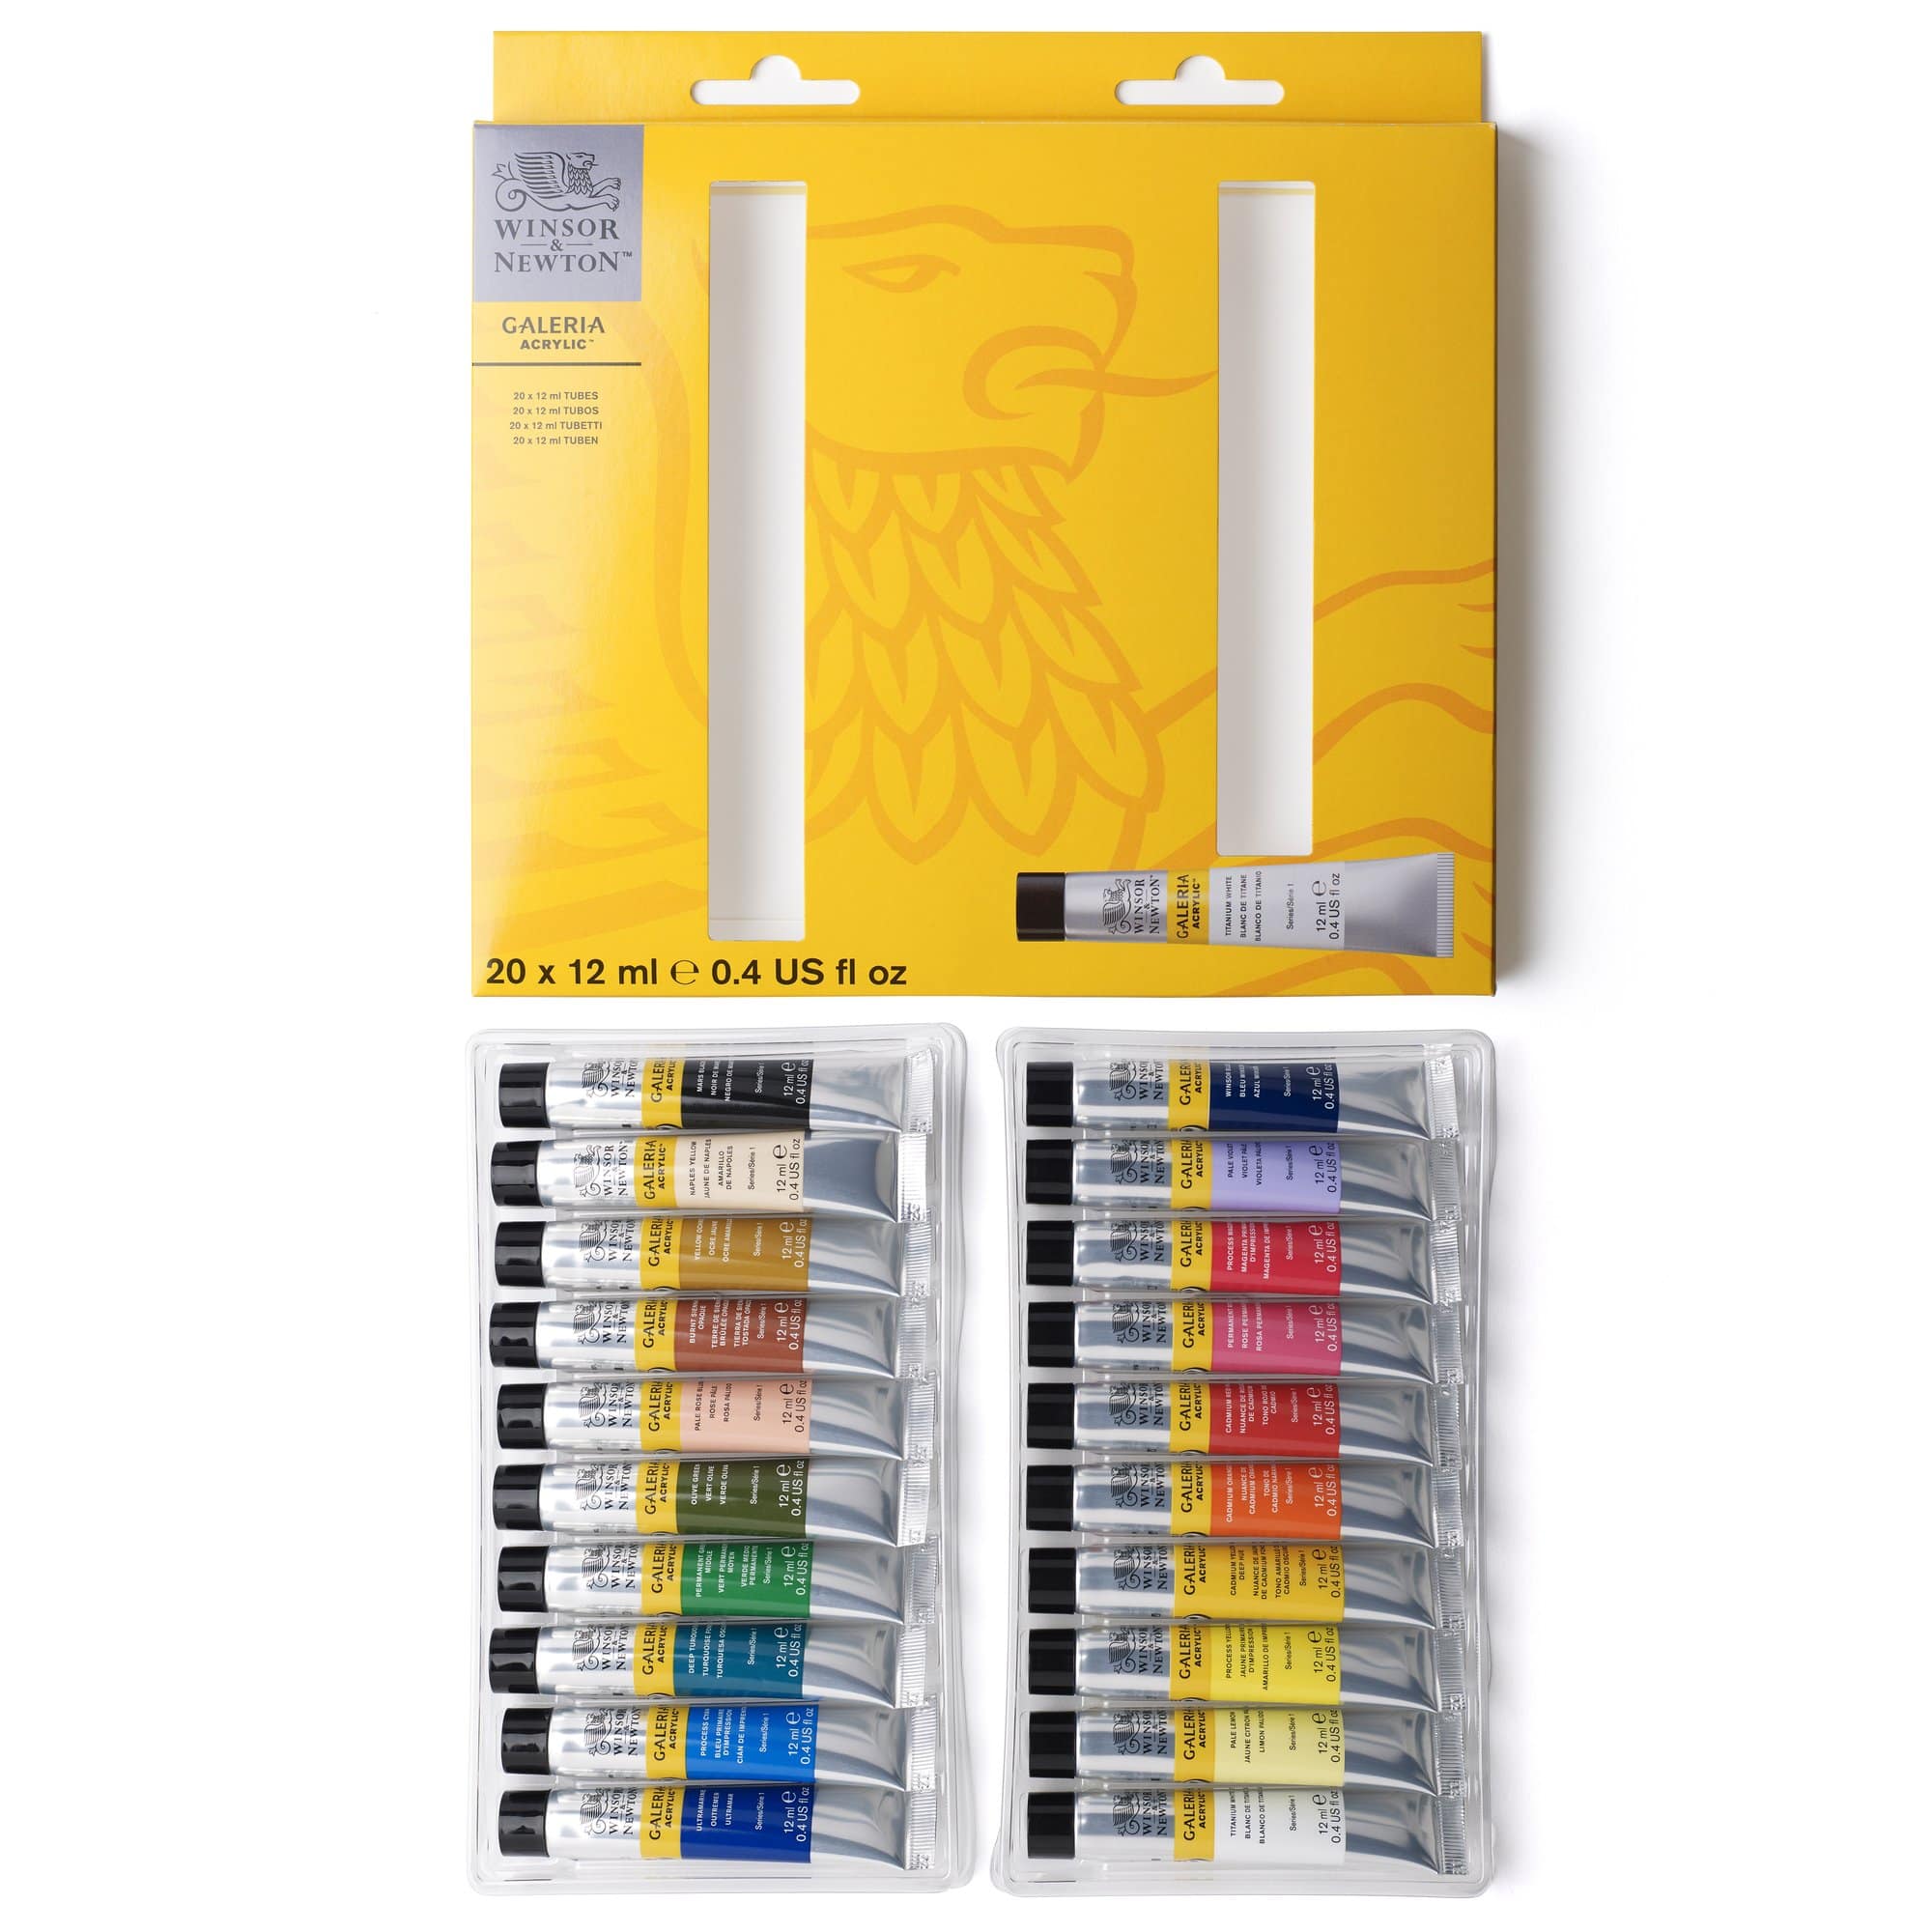 Complete Acrylic Painting Set – Art Therapy